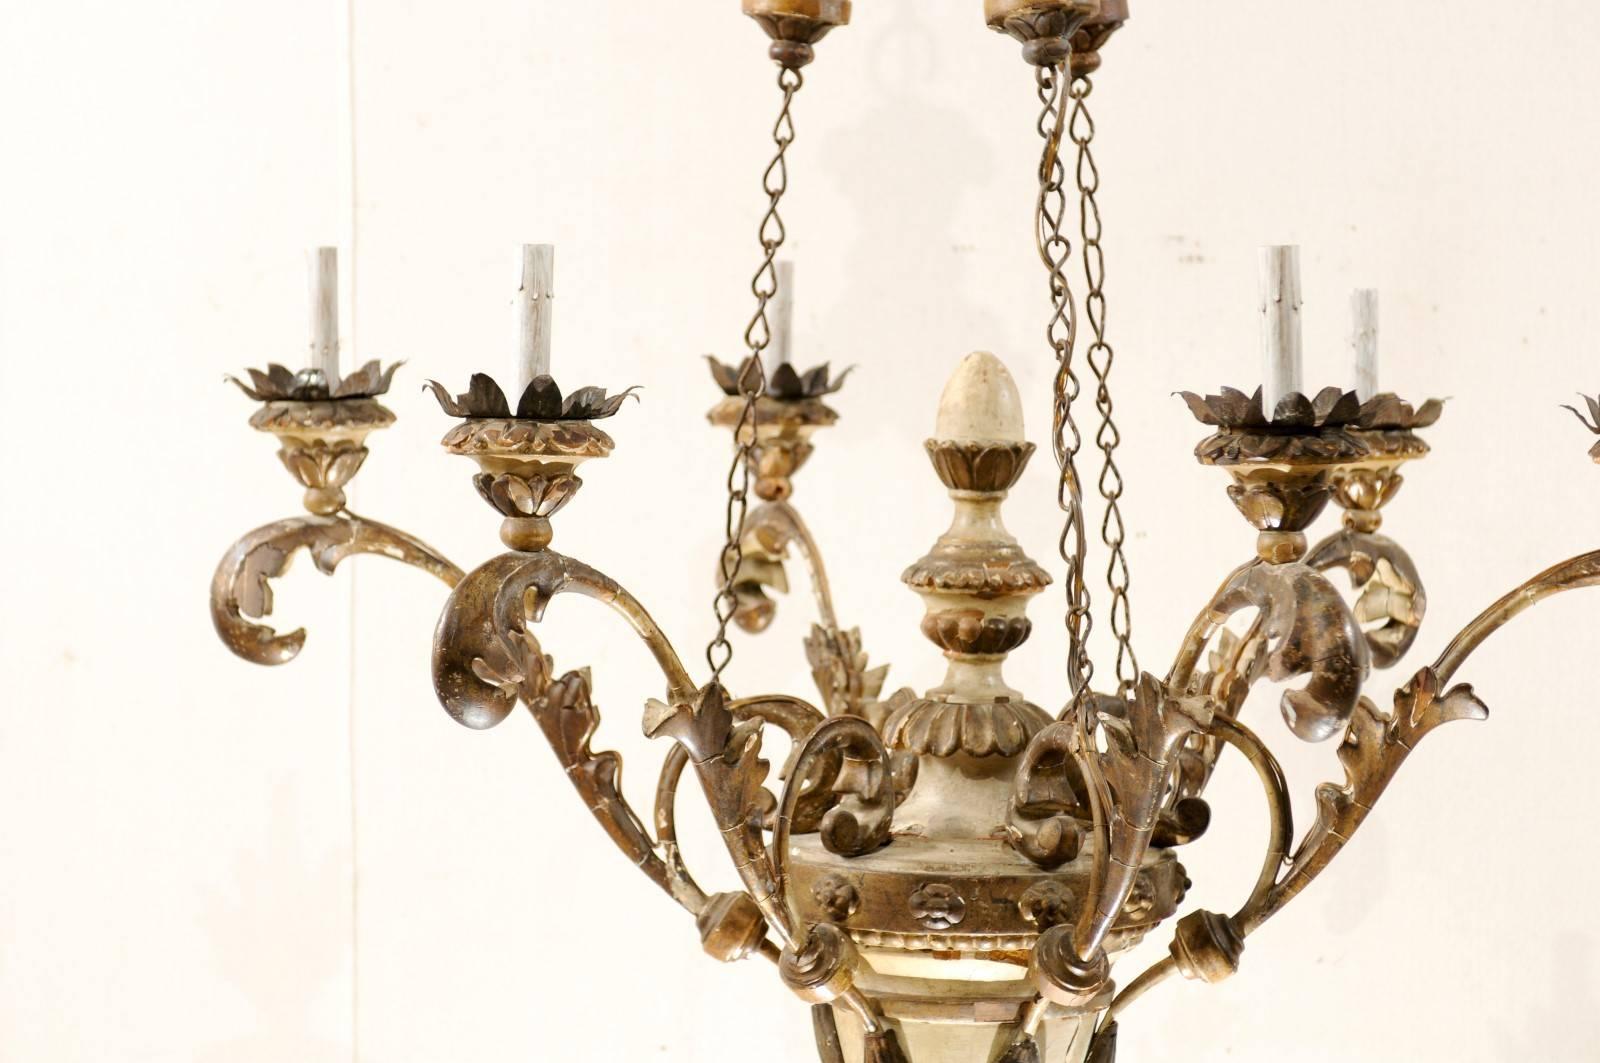 An Exquisite Pair of Italian Early 20th C. Carved & Painted Wood Chandeliers 3